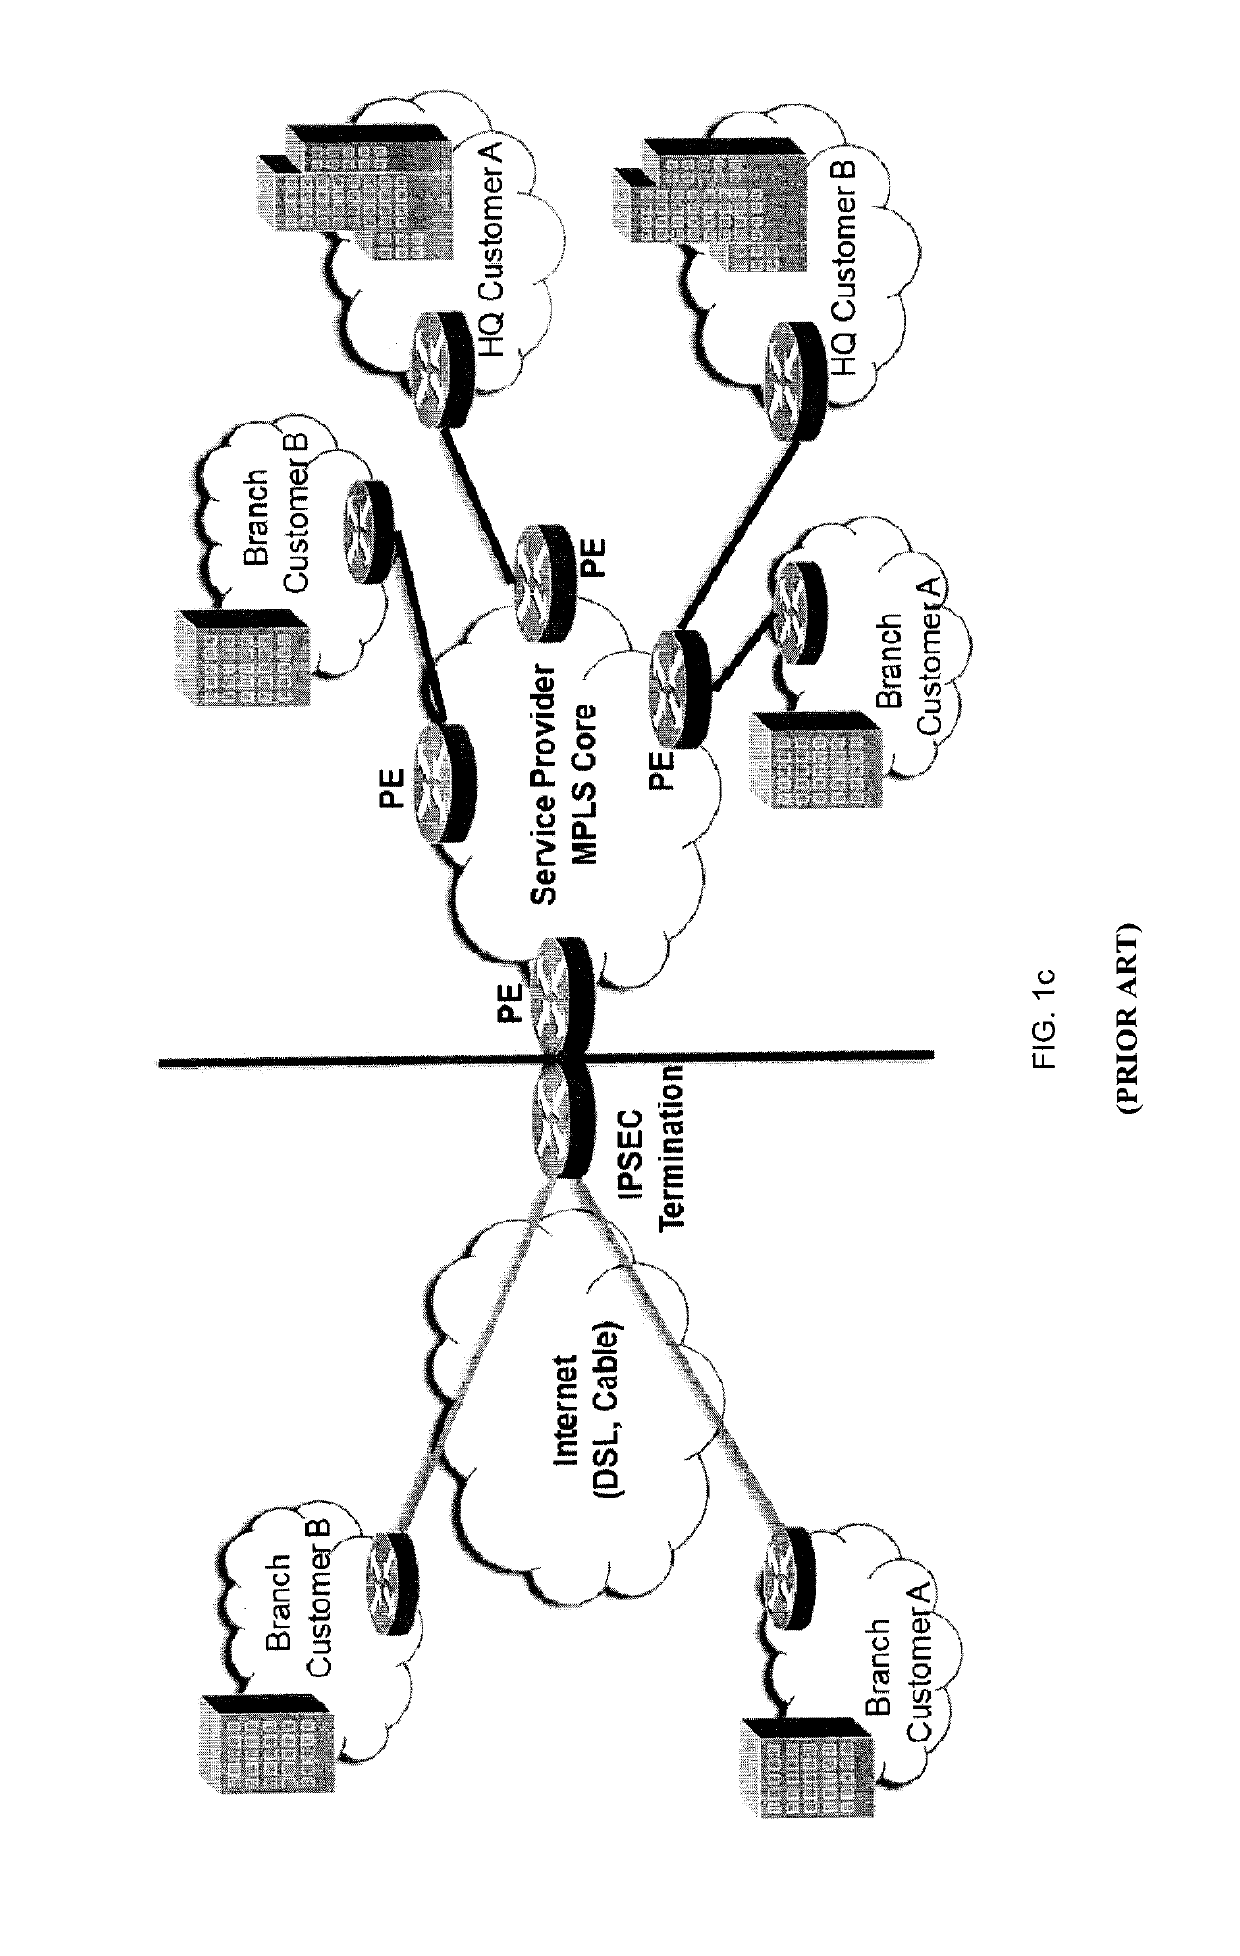 System, apparatus and method for providing improved performance of aggregated/bonded network connections with multiprotocol label switching